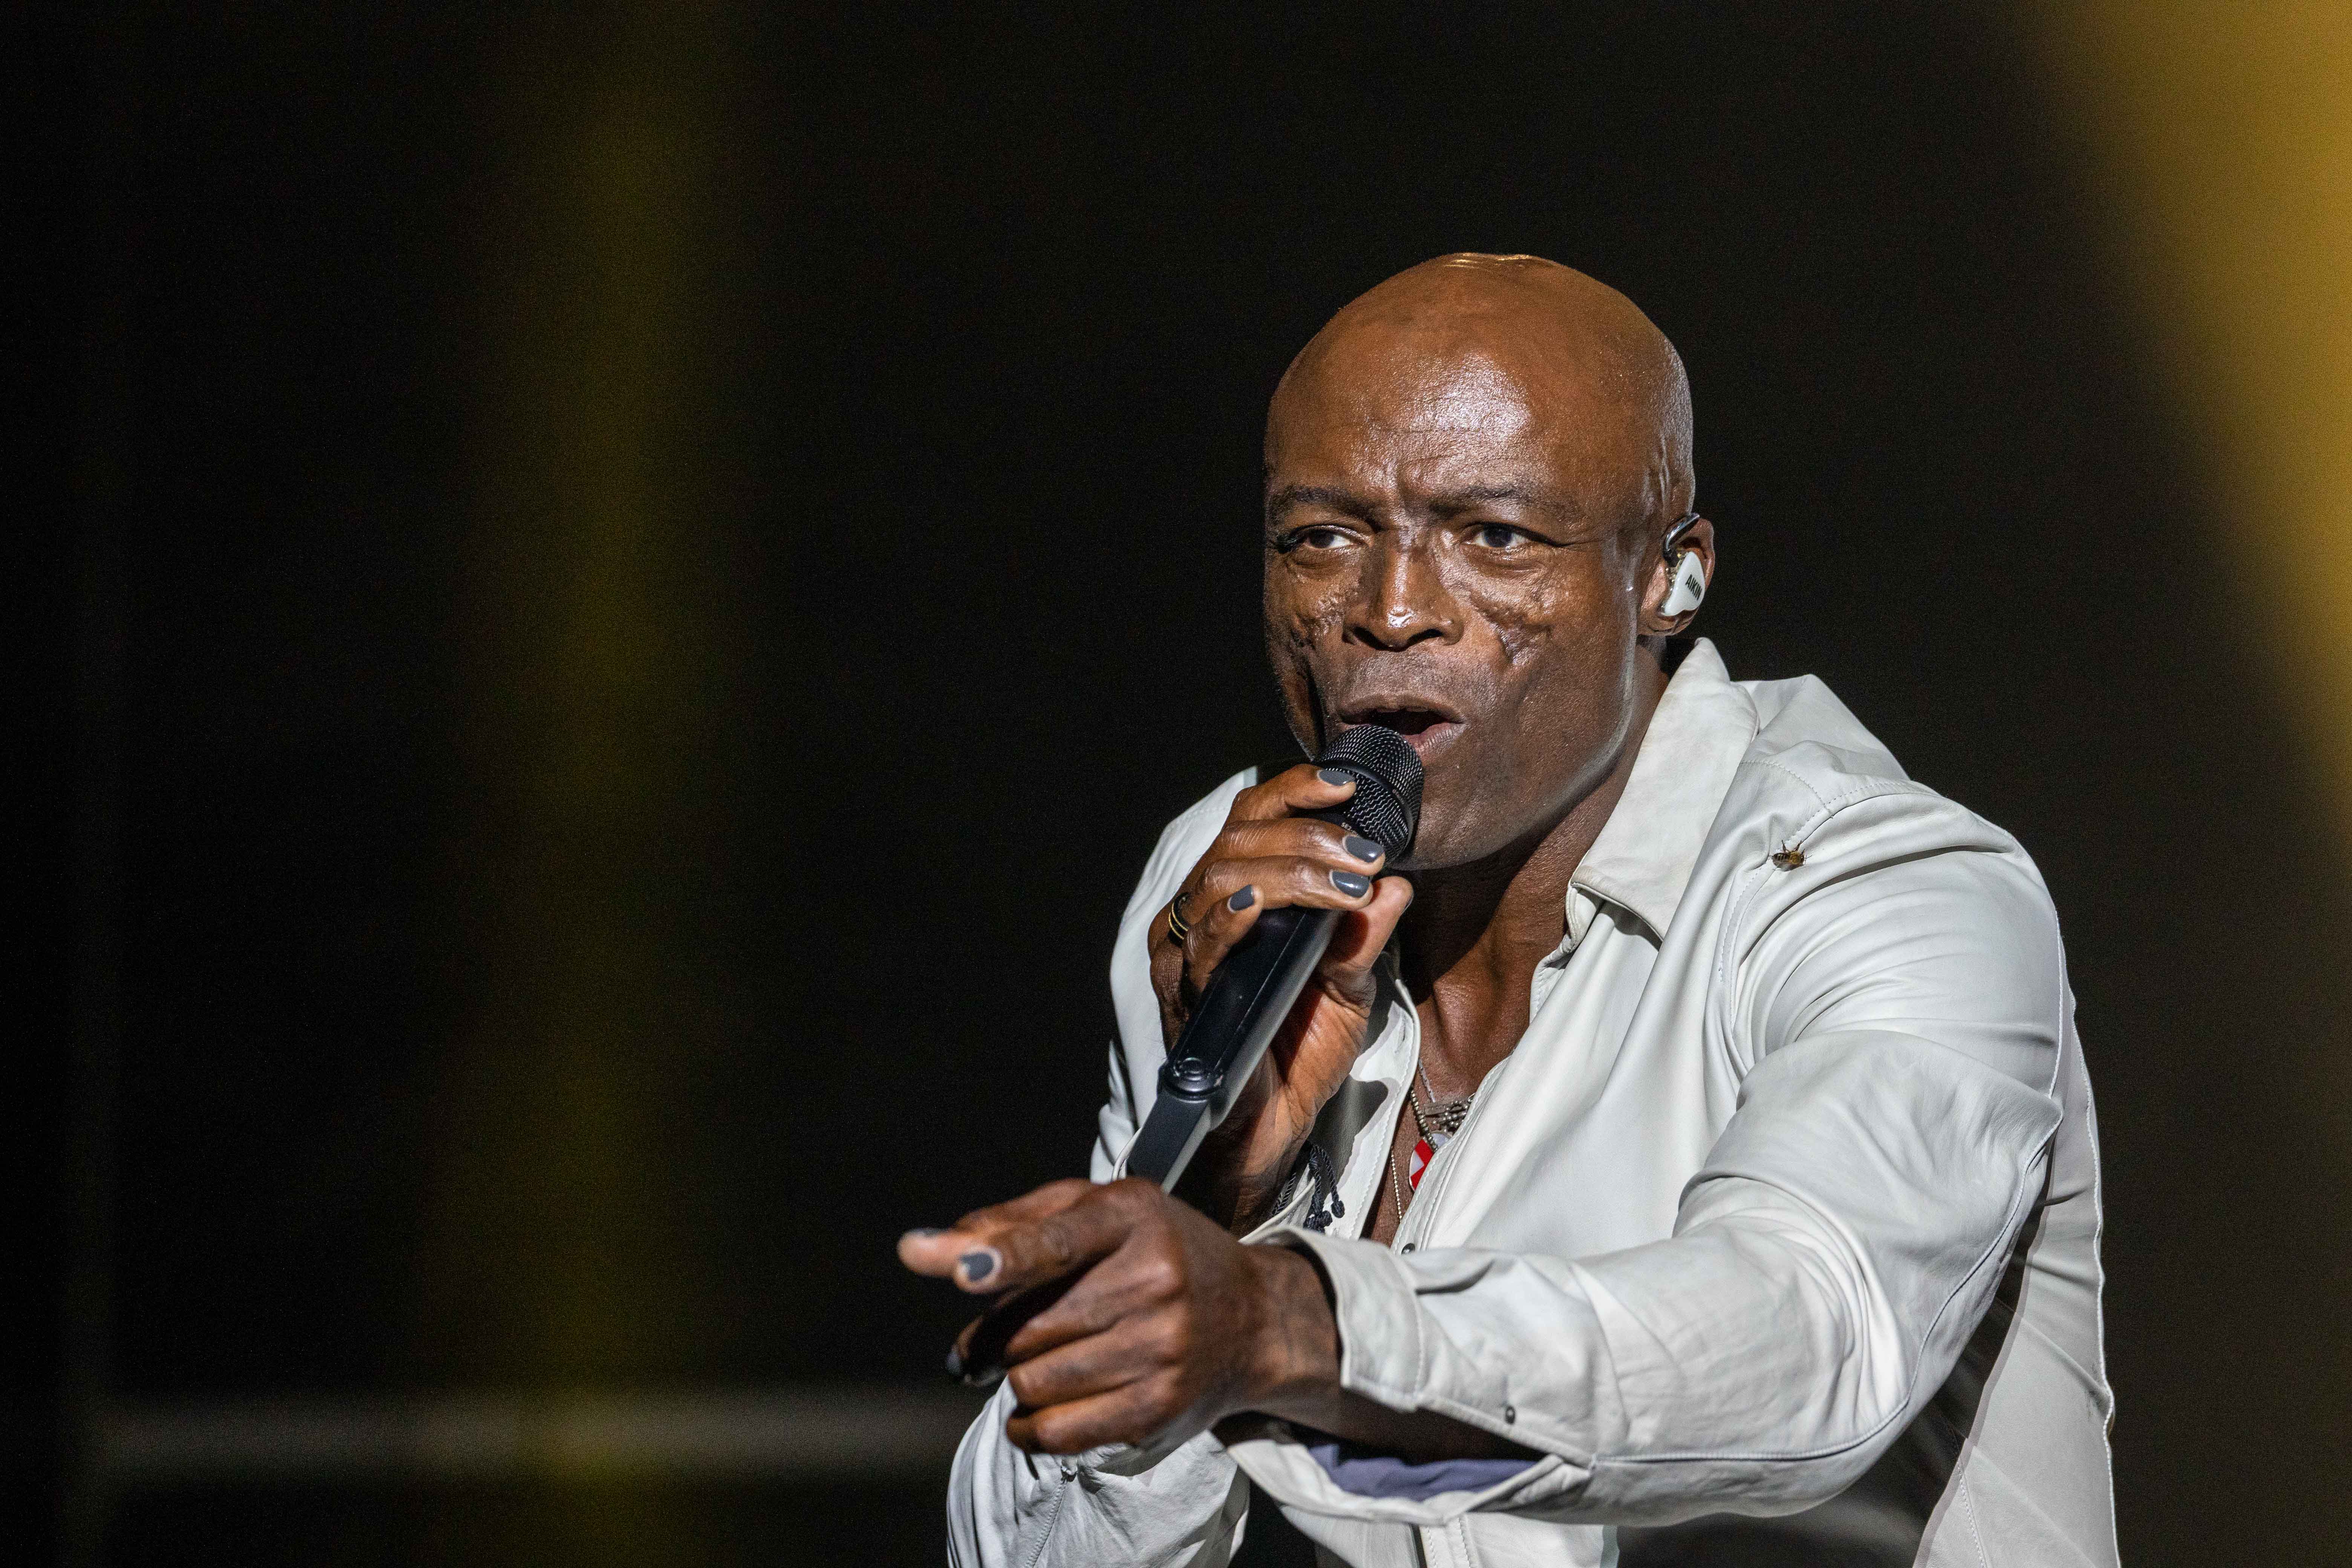 Seal performing during Starlite Occident 2023 on July 7, in Malaga, Spain. | Source: Getty Images